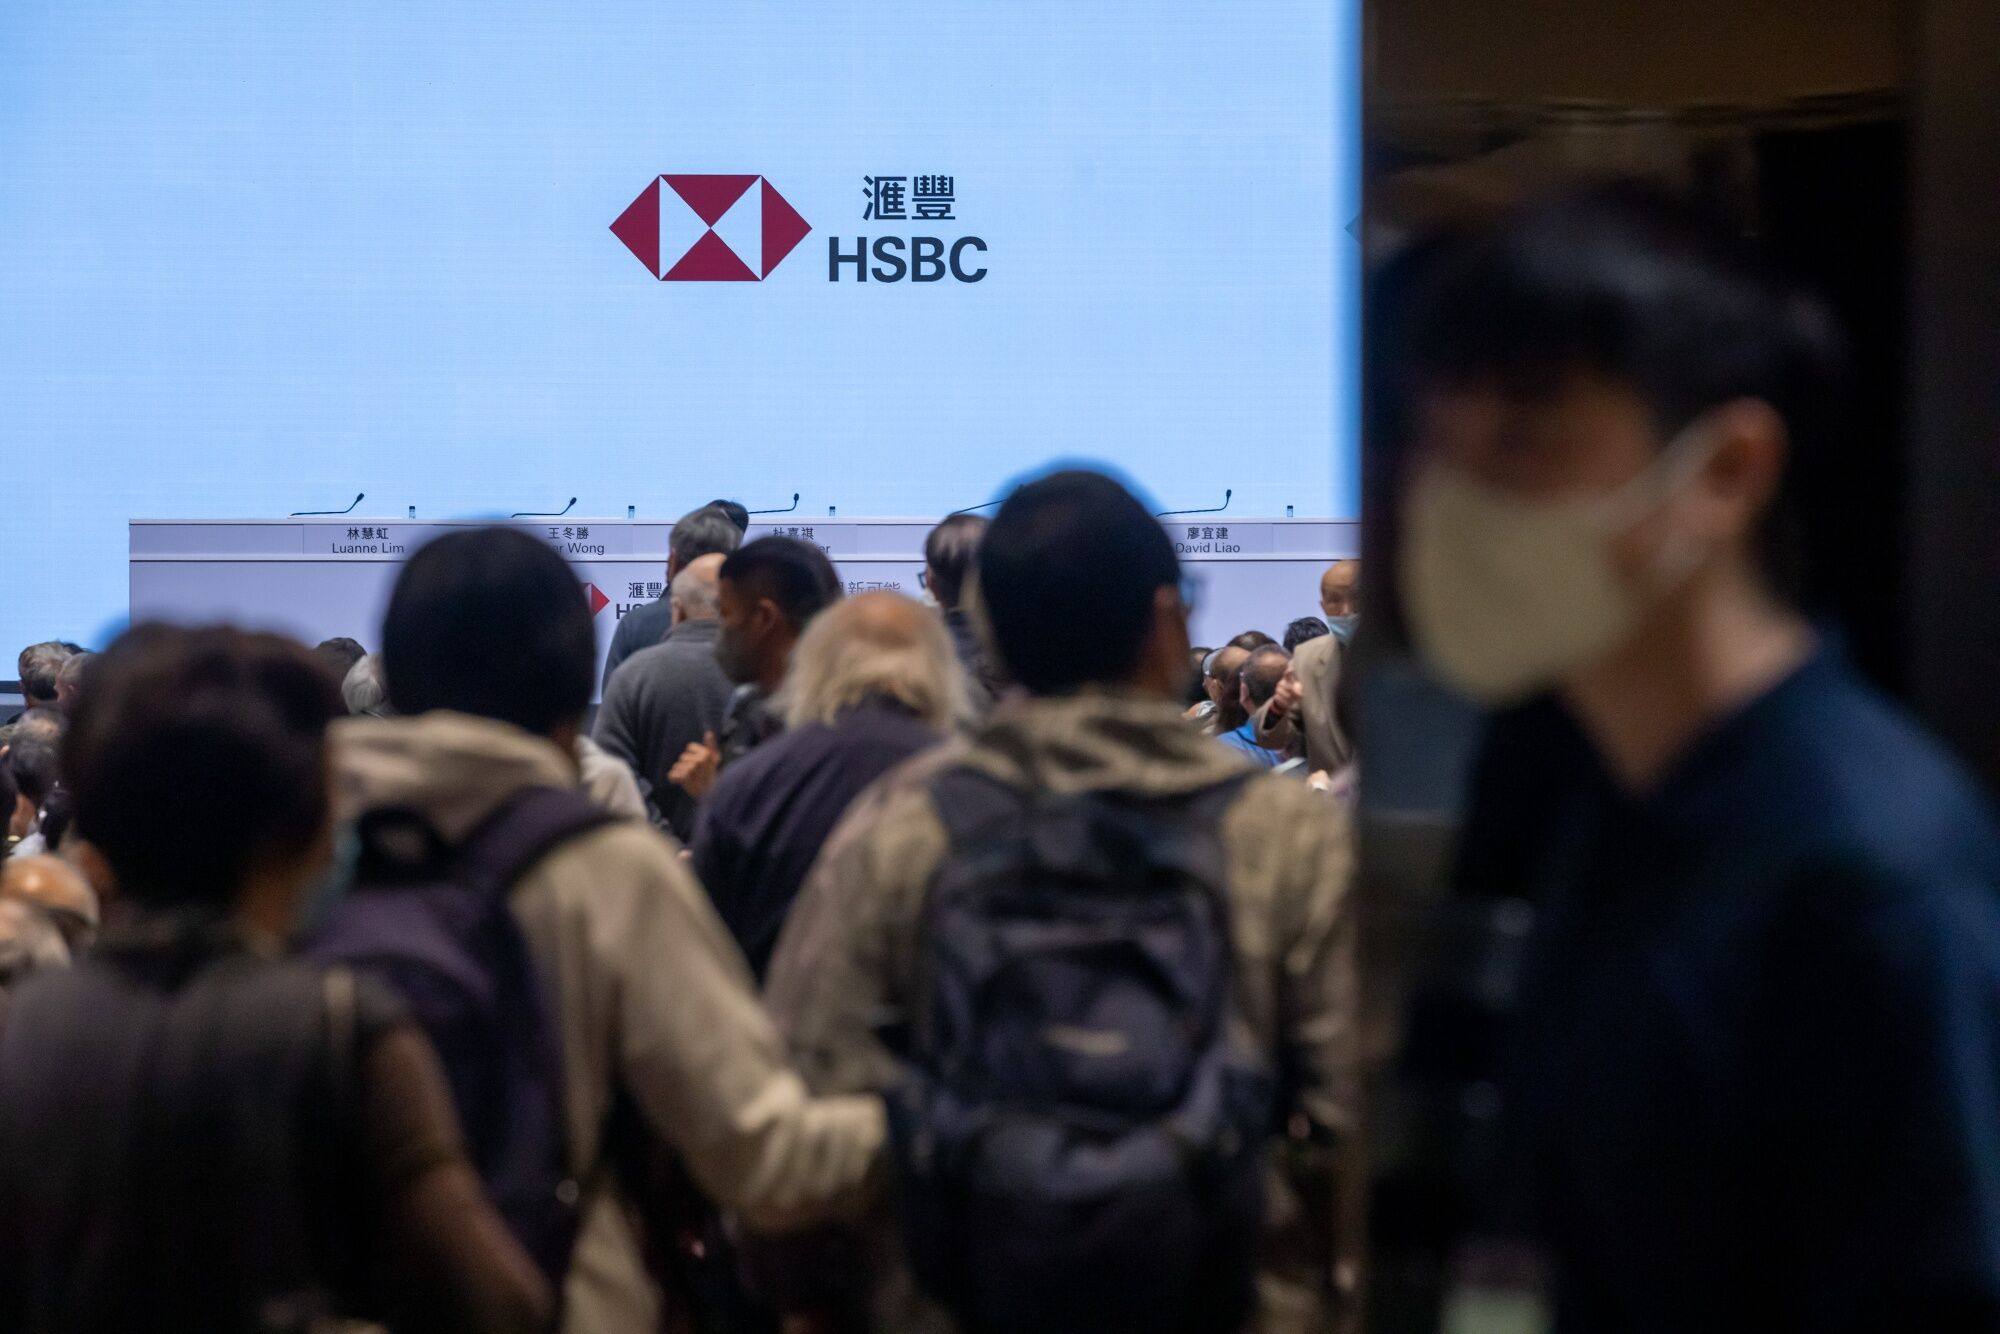 Several shareholders who spoke at Monday’s meeting supported the two resolutions made by  the Hong Kong-based “Spin Off HSBC Asia Concern Group” in March. Photo: Bloomberg